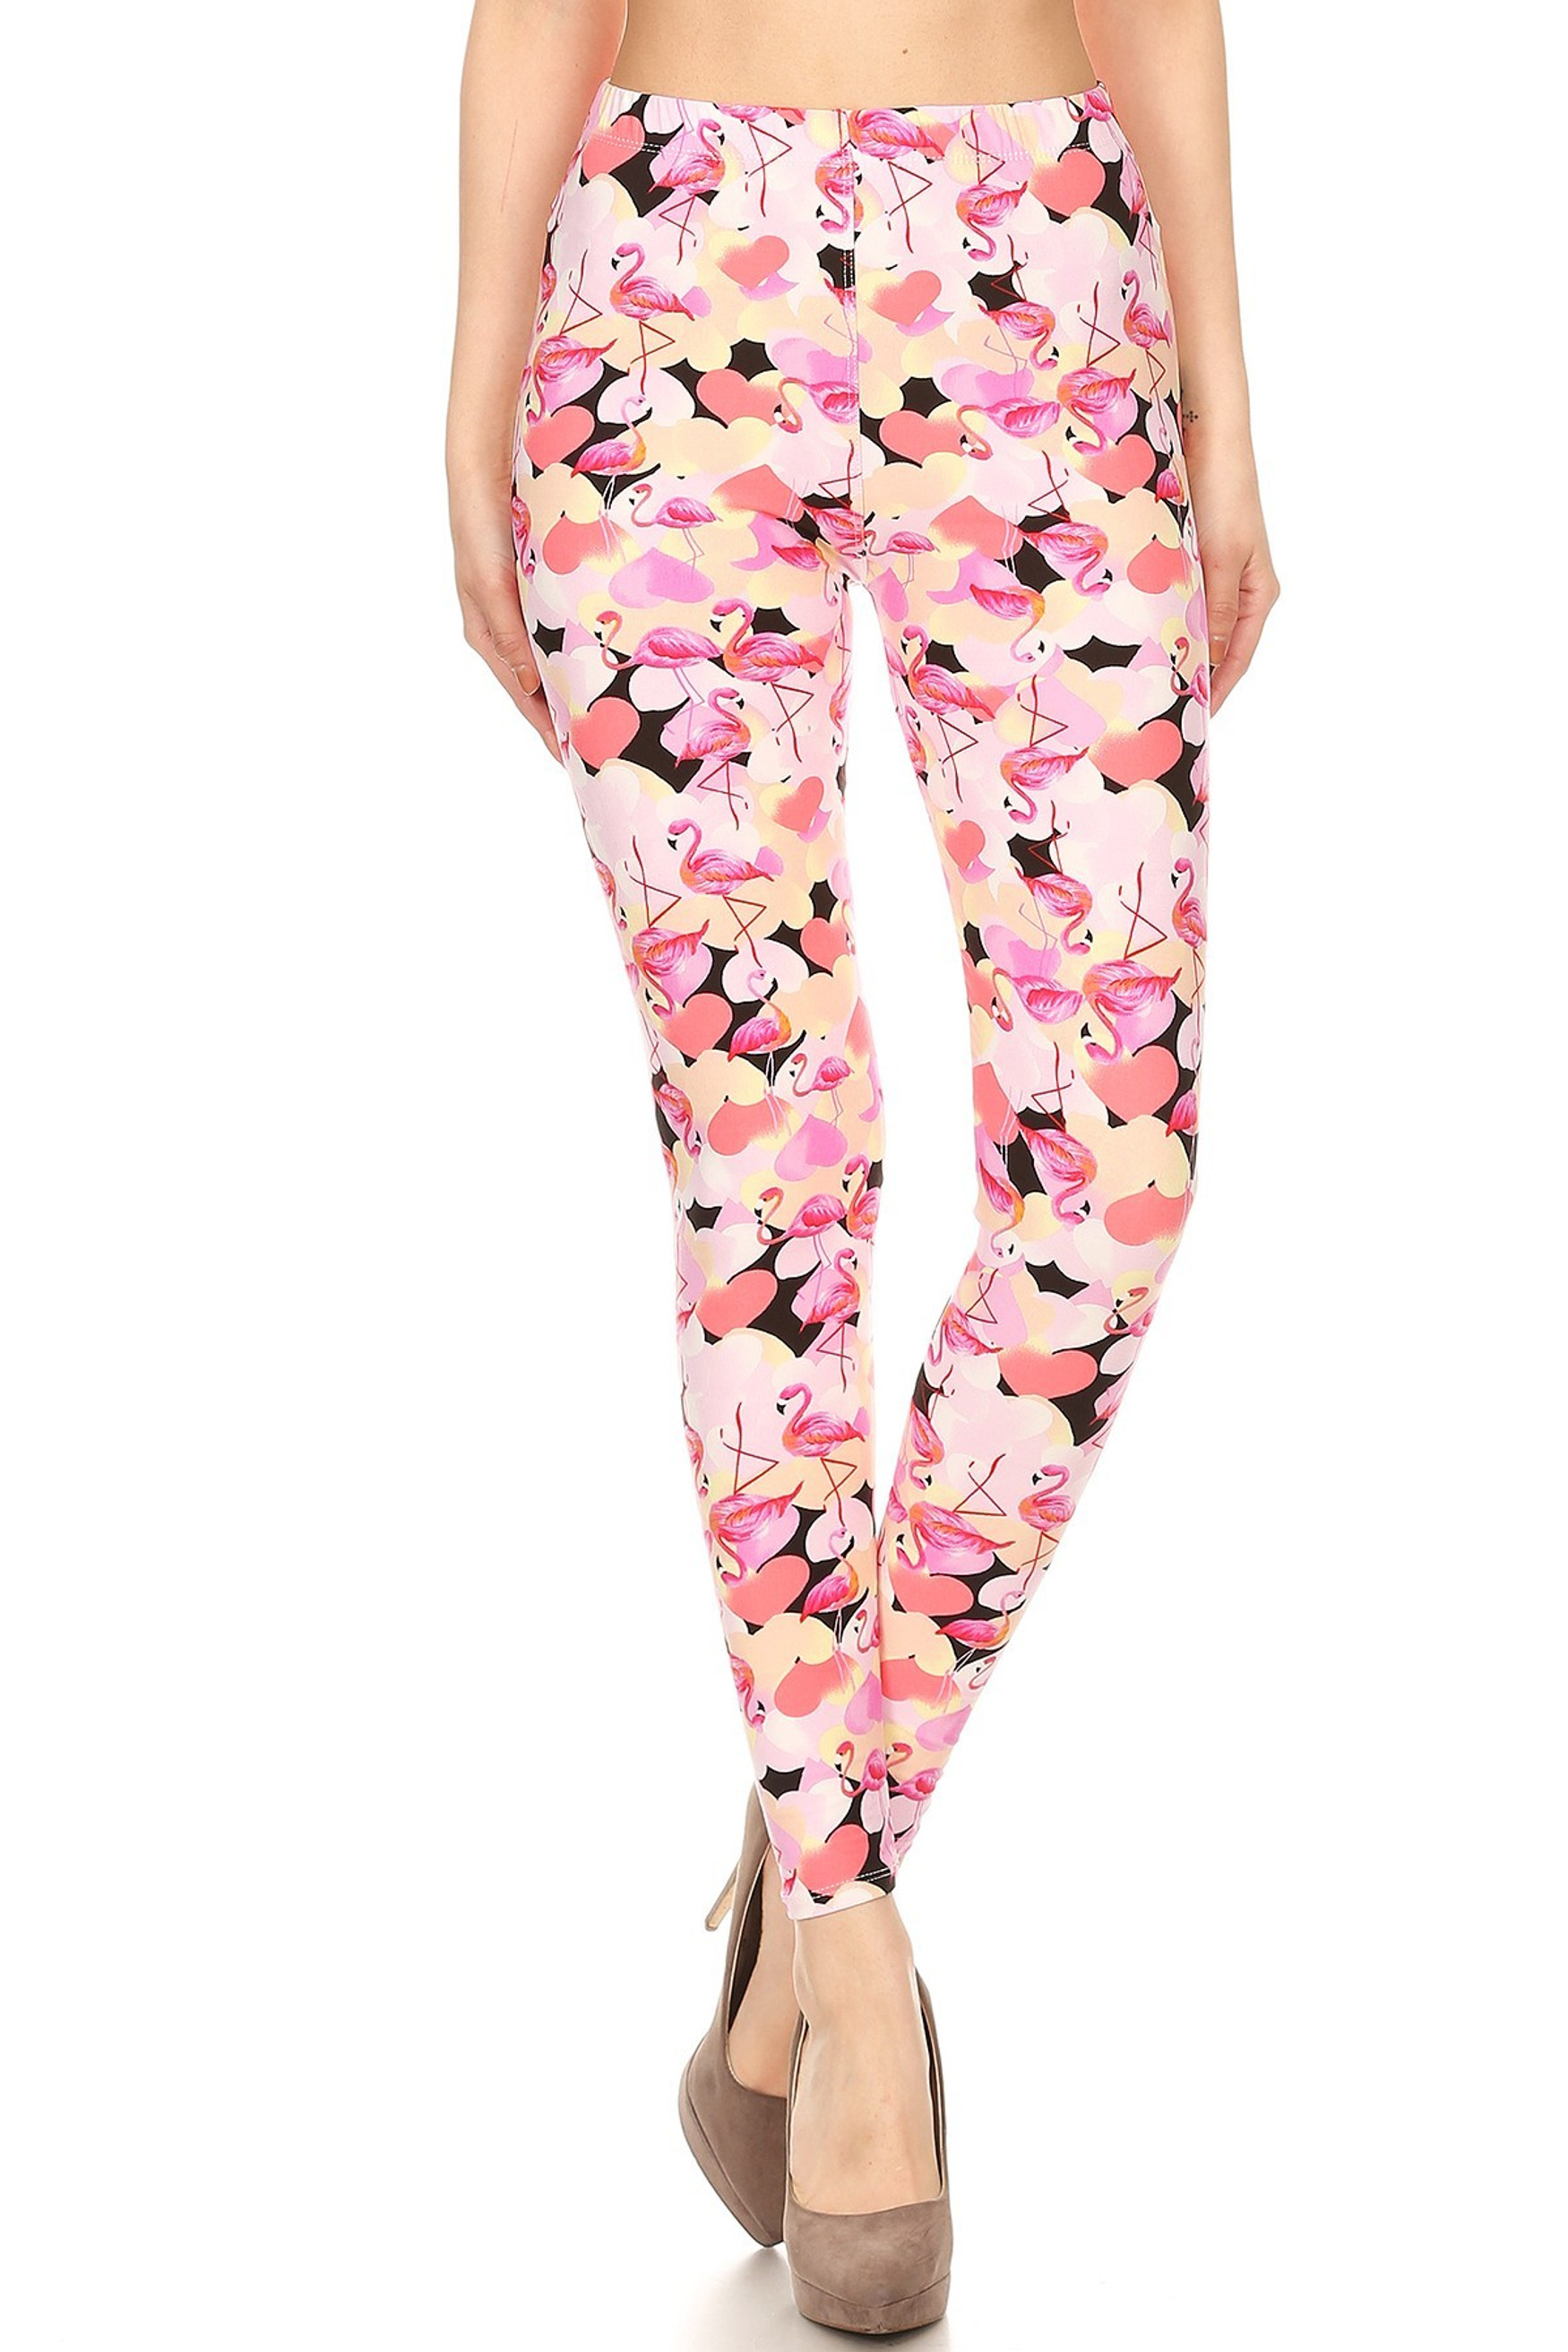 Front of Soft Brushed Gorgeous Pink Flamingos Leggings - XSmall